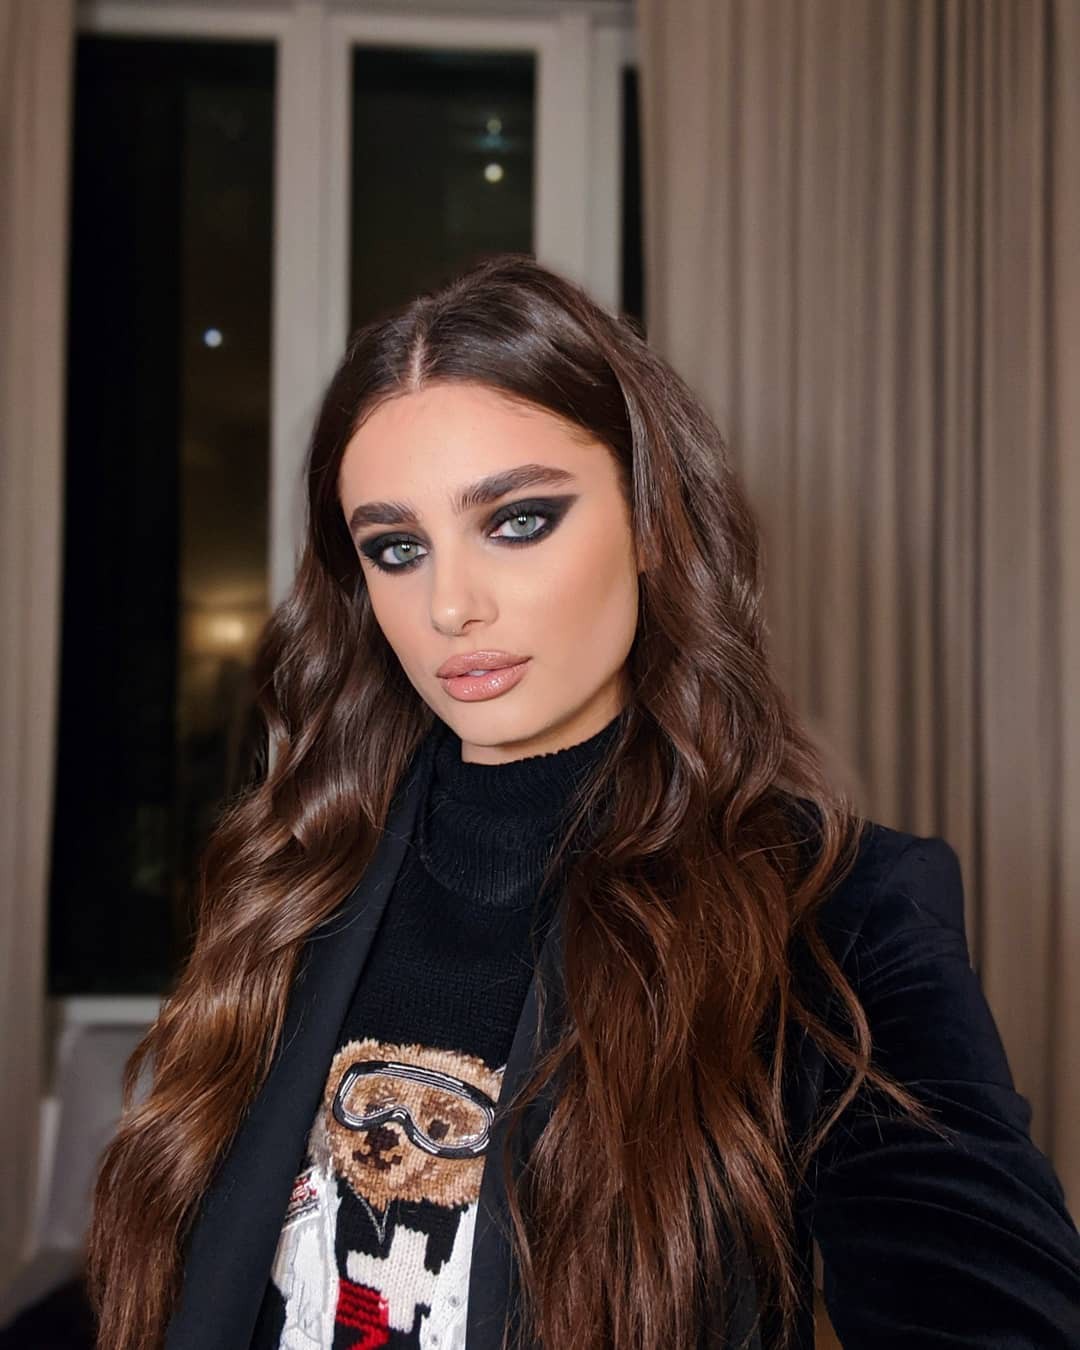 Awesome Outfits Taylor Hill Pic Insta: instagram models,  Instagram pictures,  hottest girls on Instagram,  Taylor Hill,  Hot Taylor Hill  